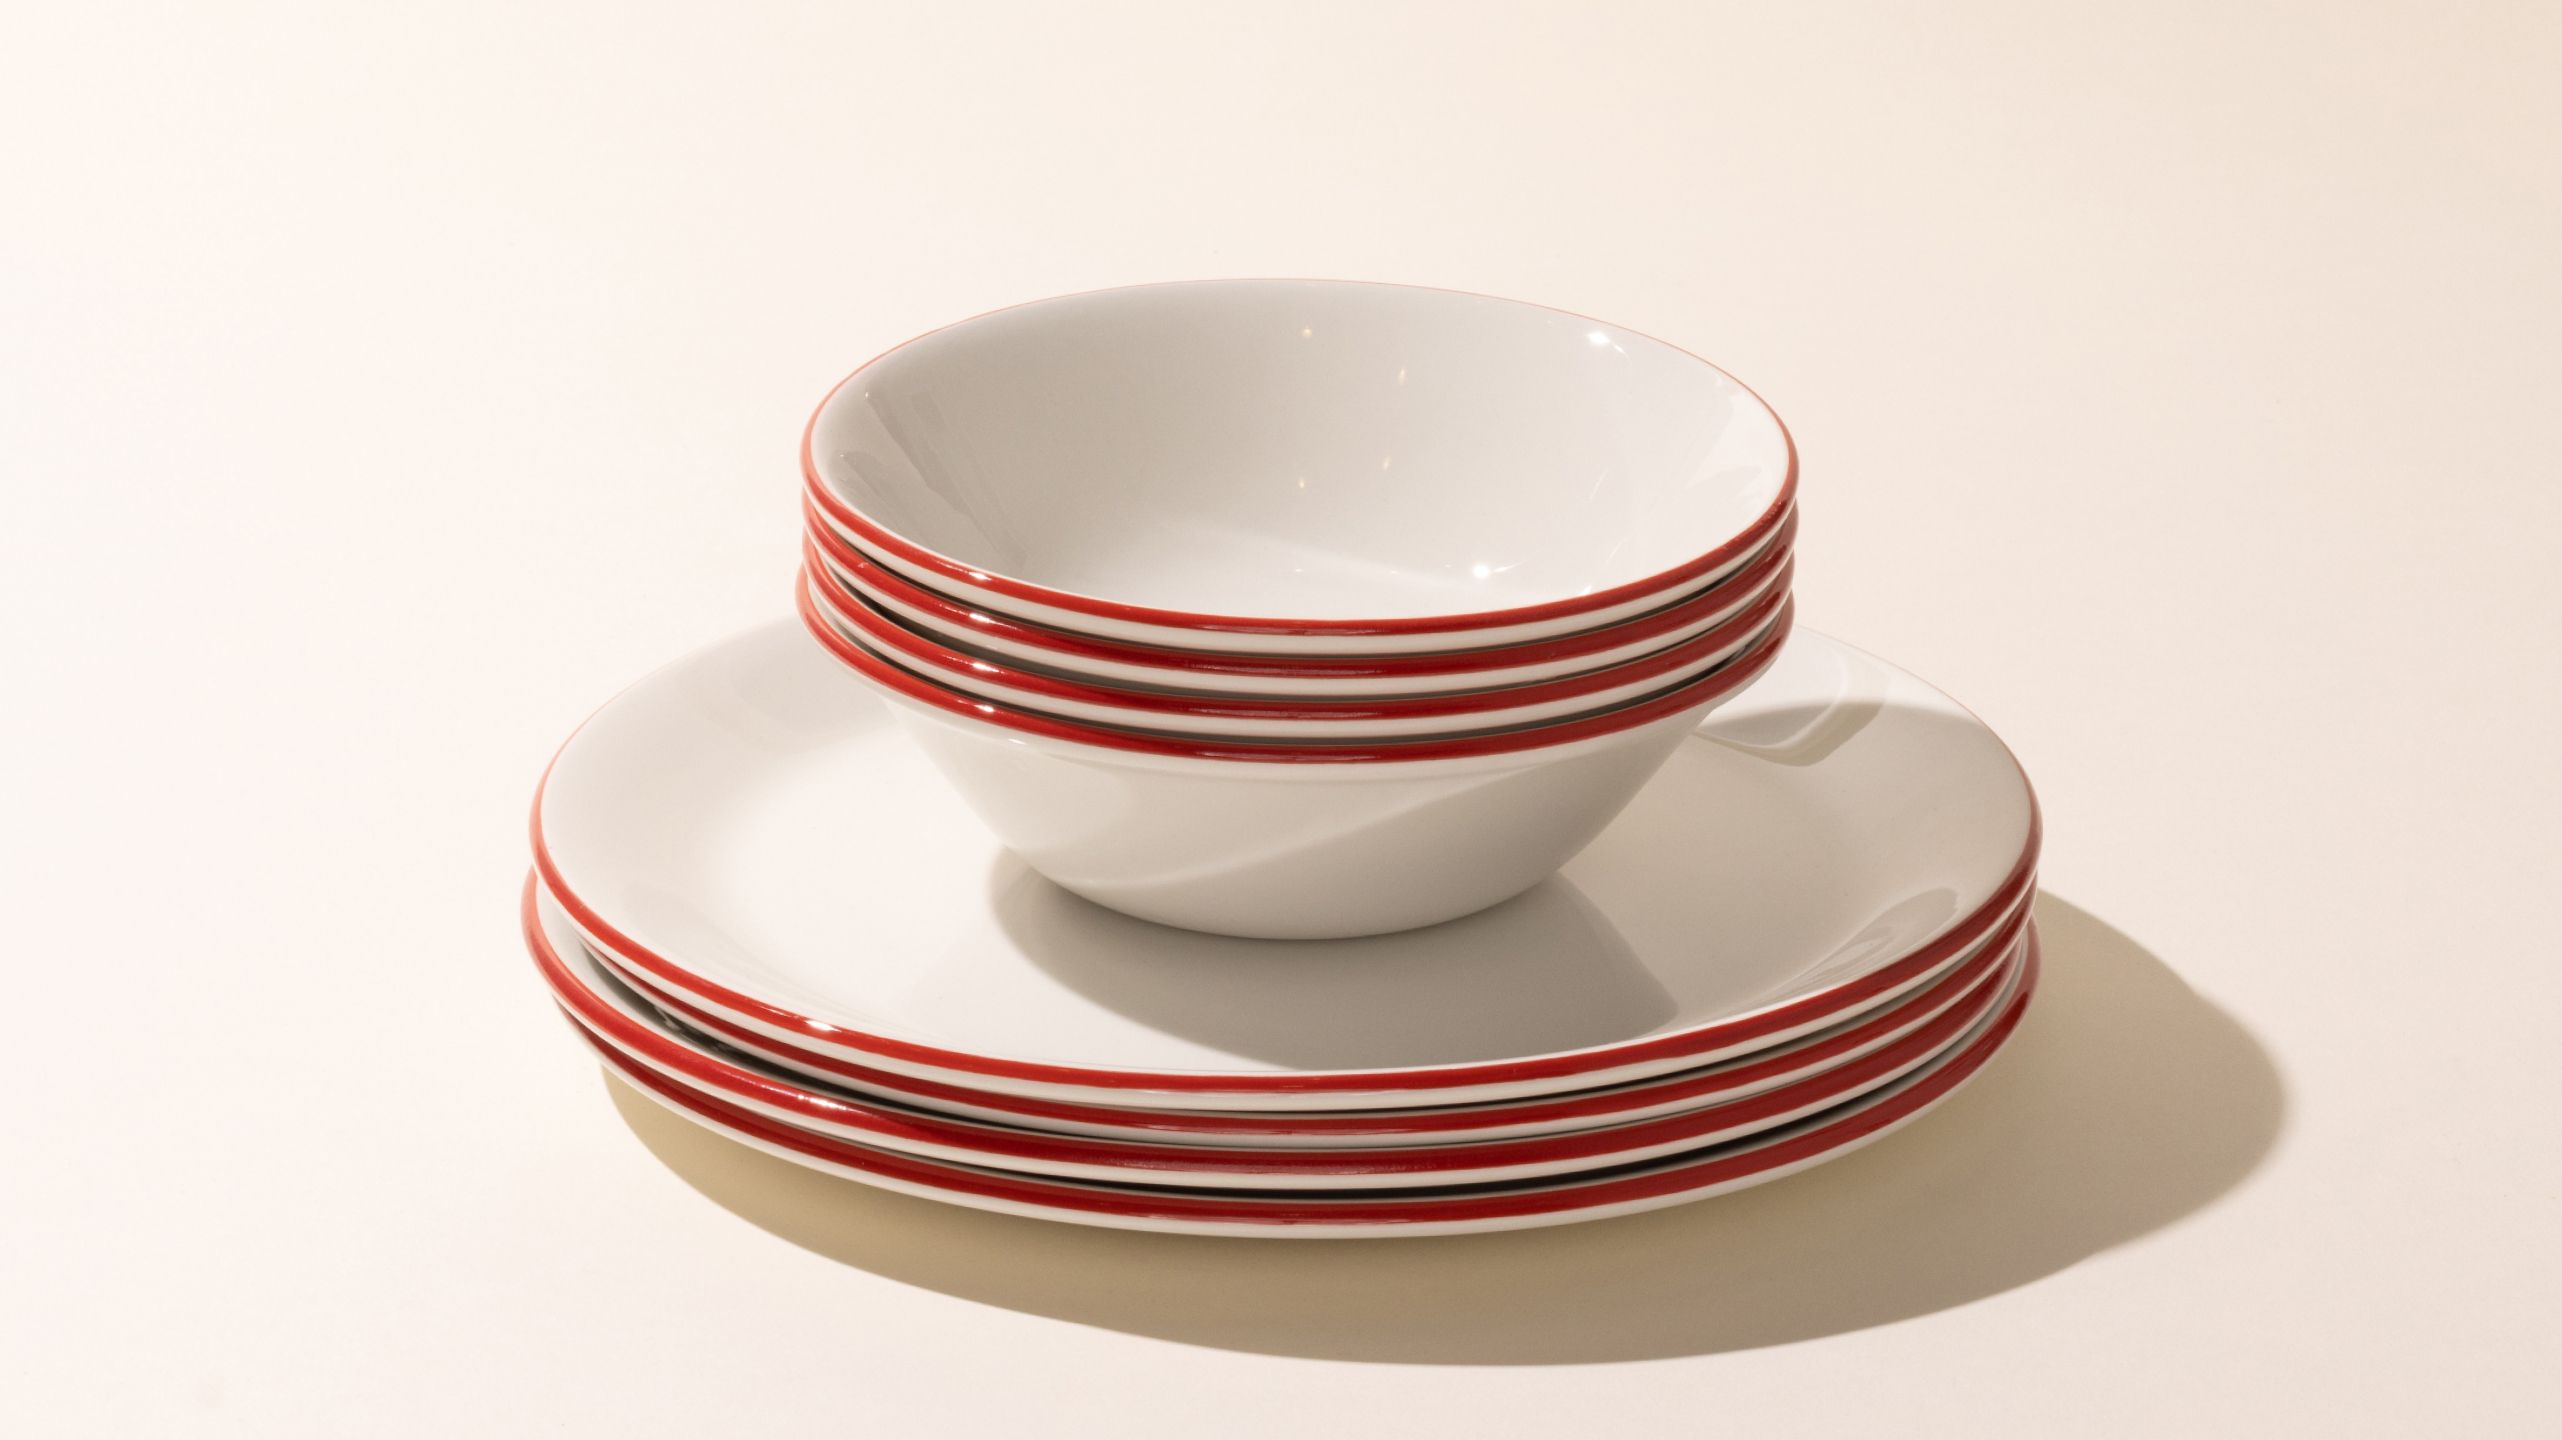 brasserie-red-banded-porcelain-dinnerware-plates-collection-white